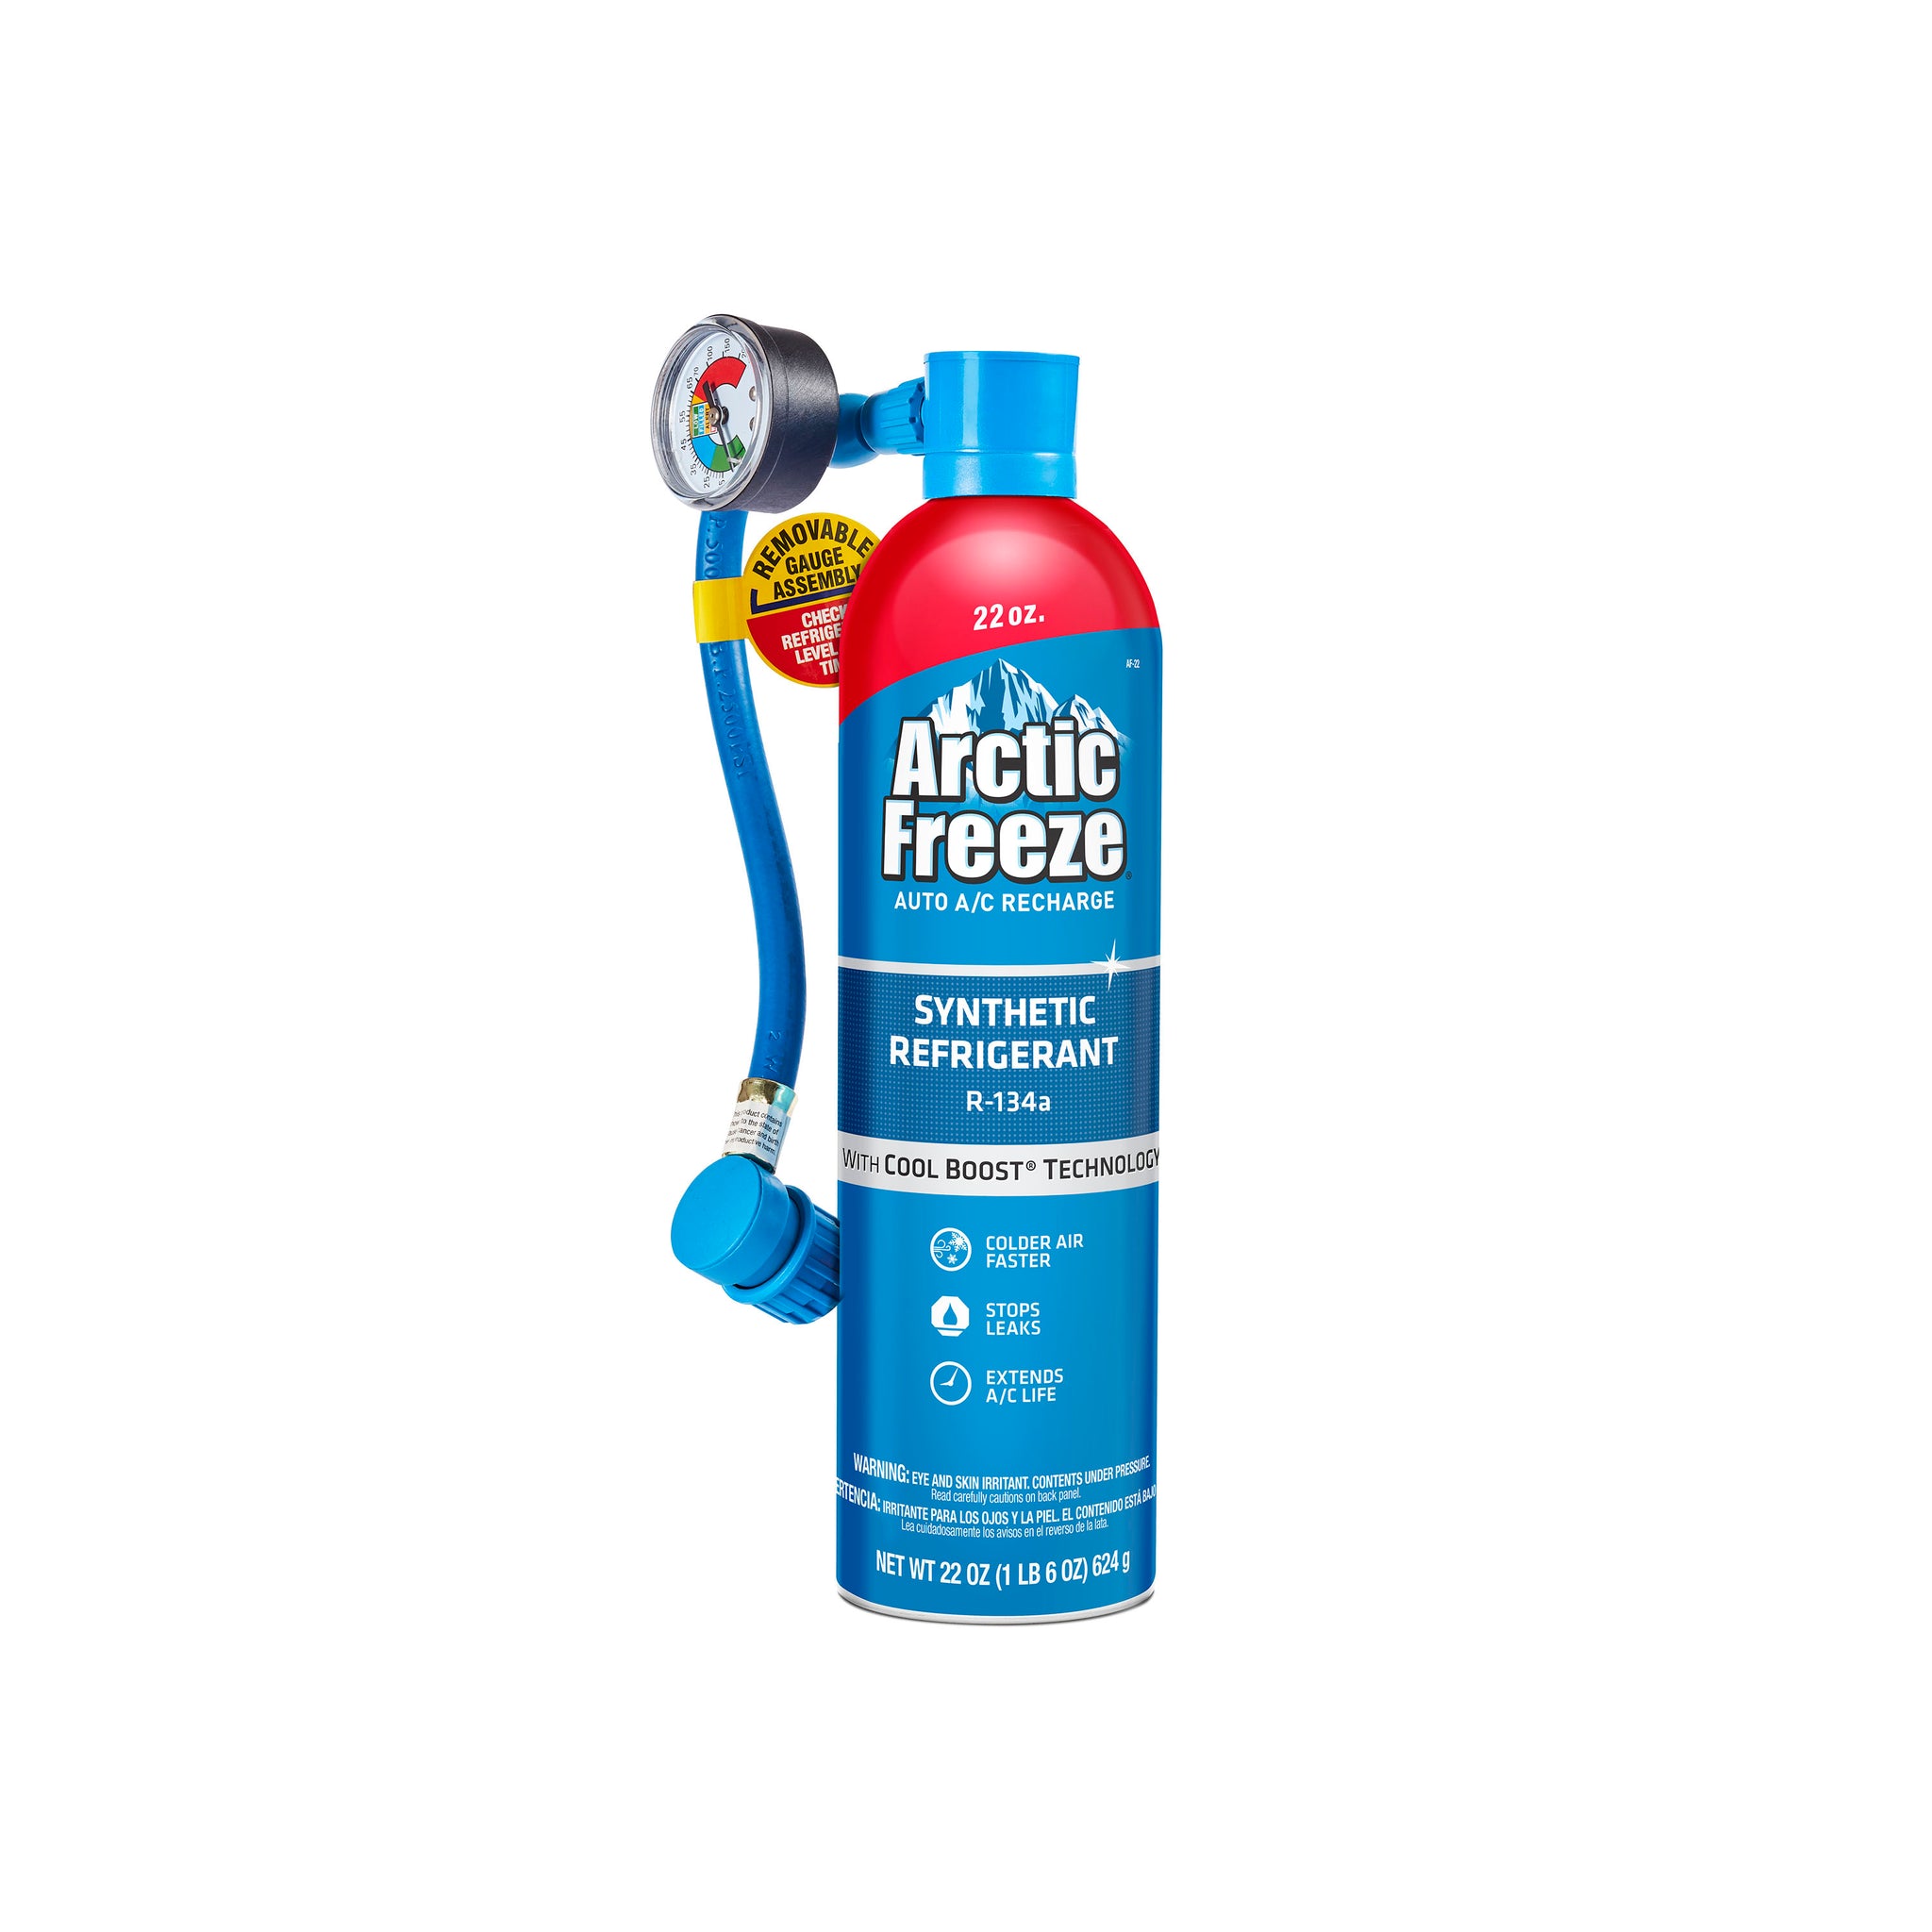 Arctic Freeze Auto AC Recharge Ultra Synthetic R-134a Kit, 22 oz